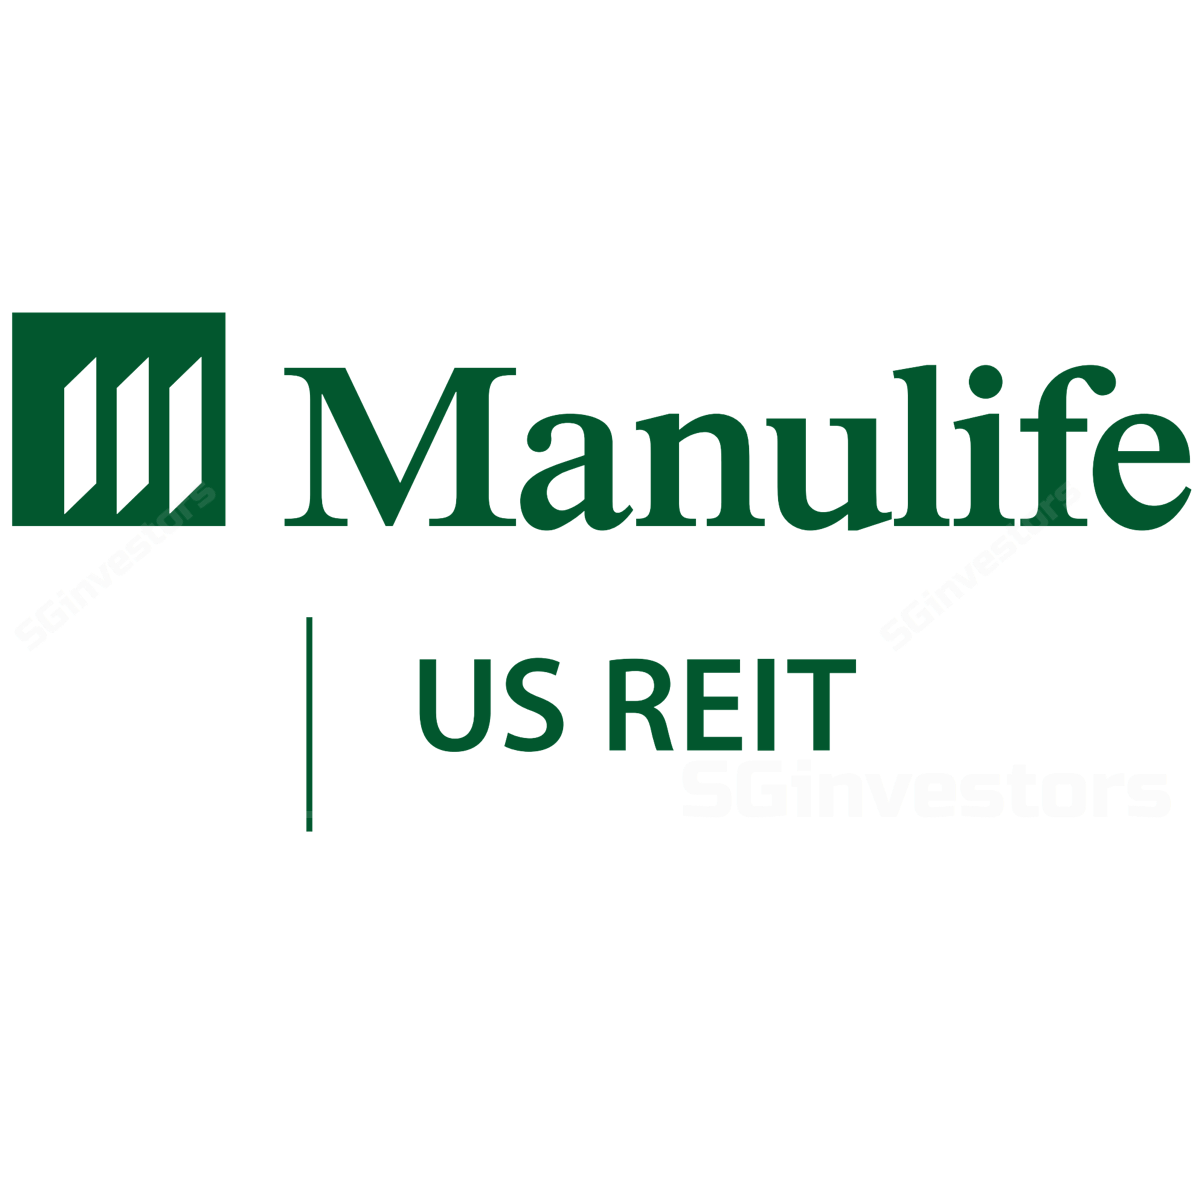 Manulife US REIT - UOB Kay Hian Research 2018-08-07: 2q18 Strong And Steady; Amid Challenges Ahead